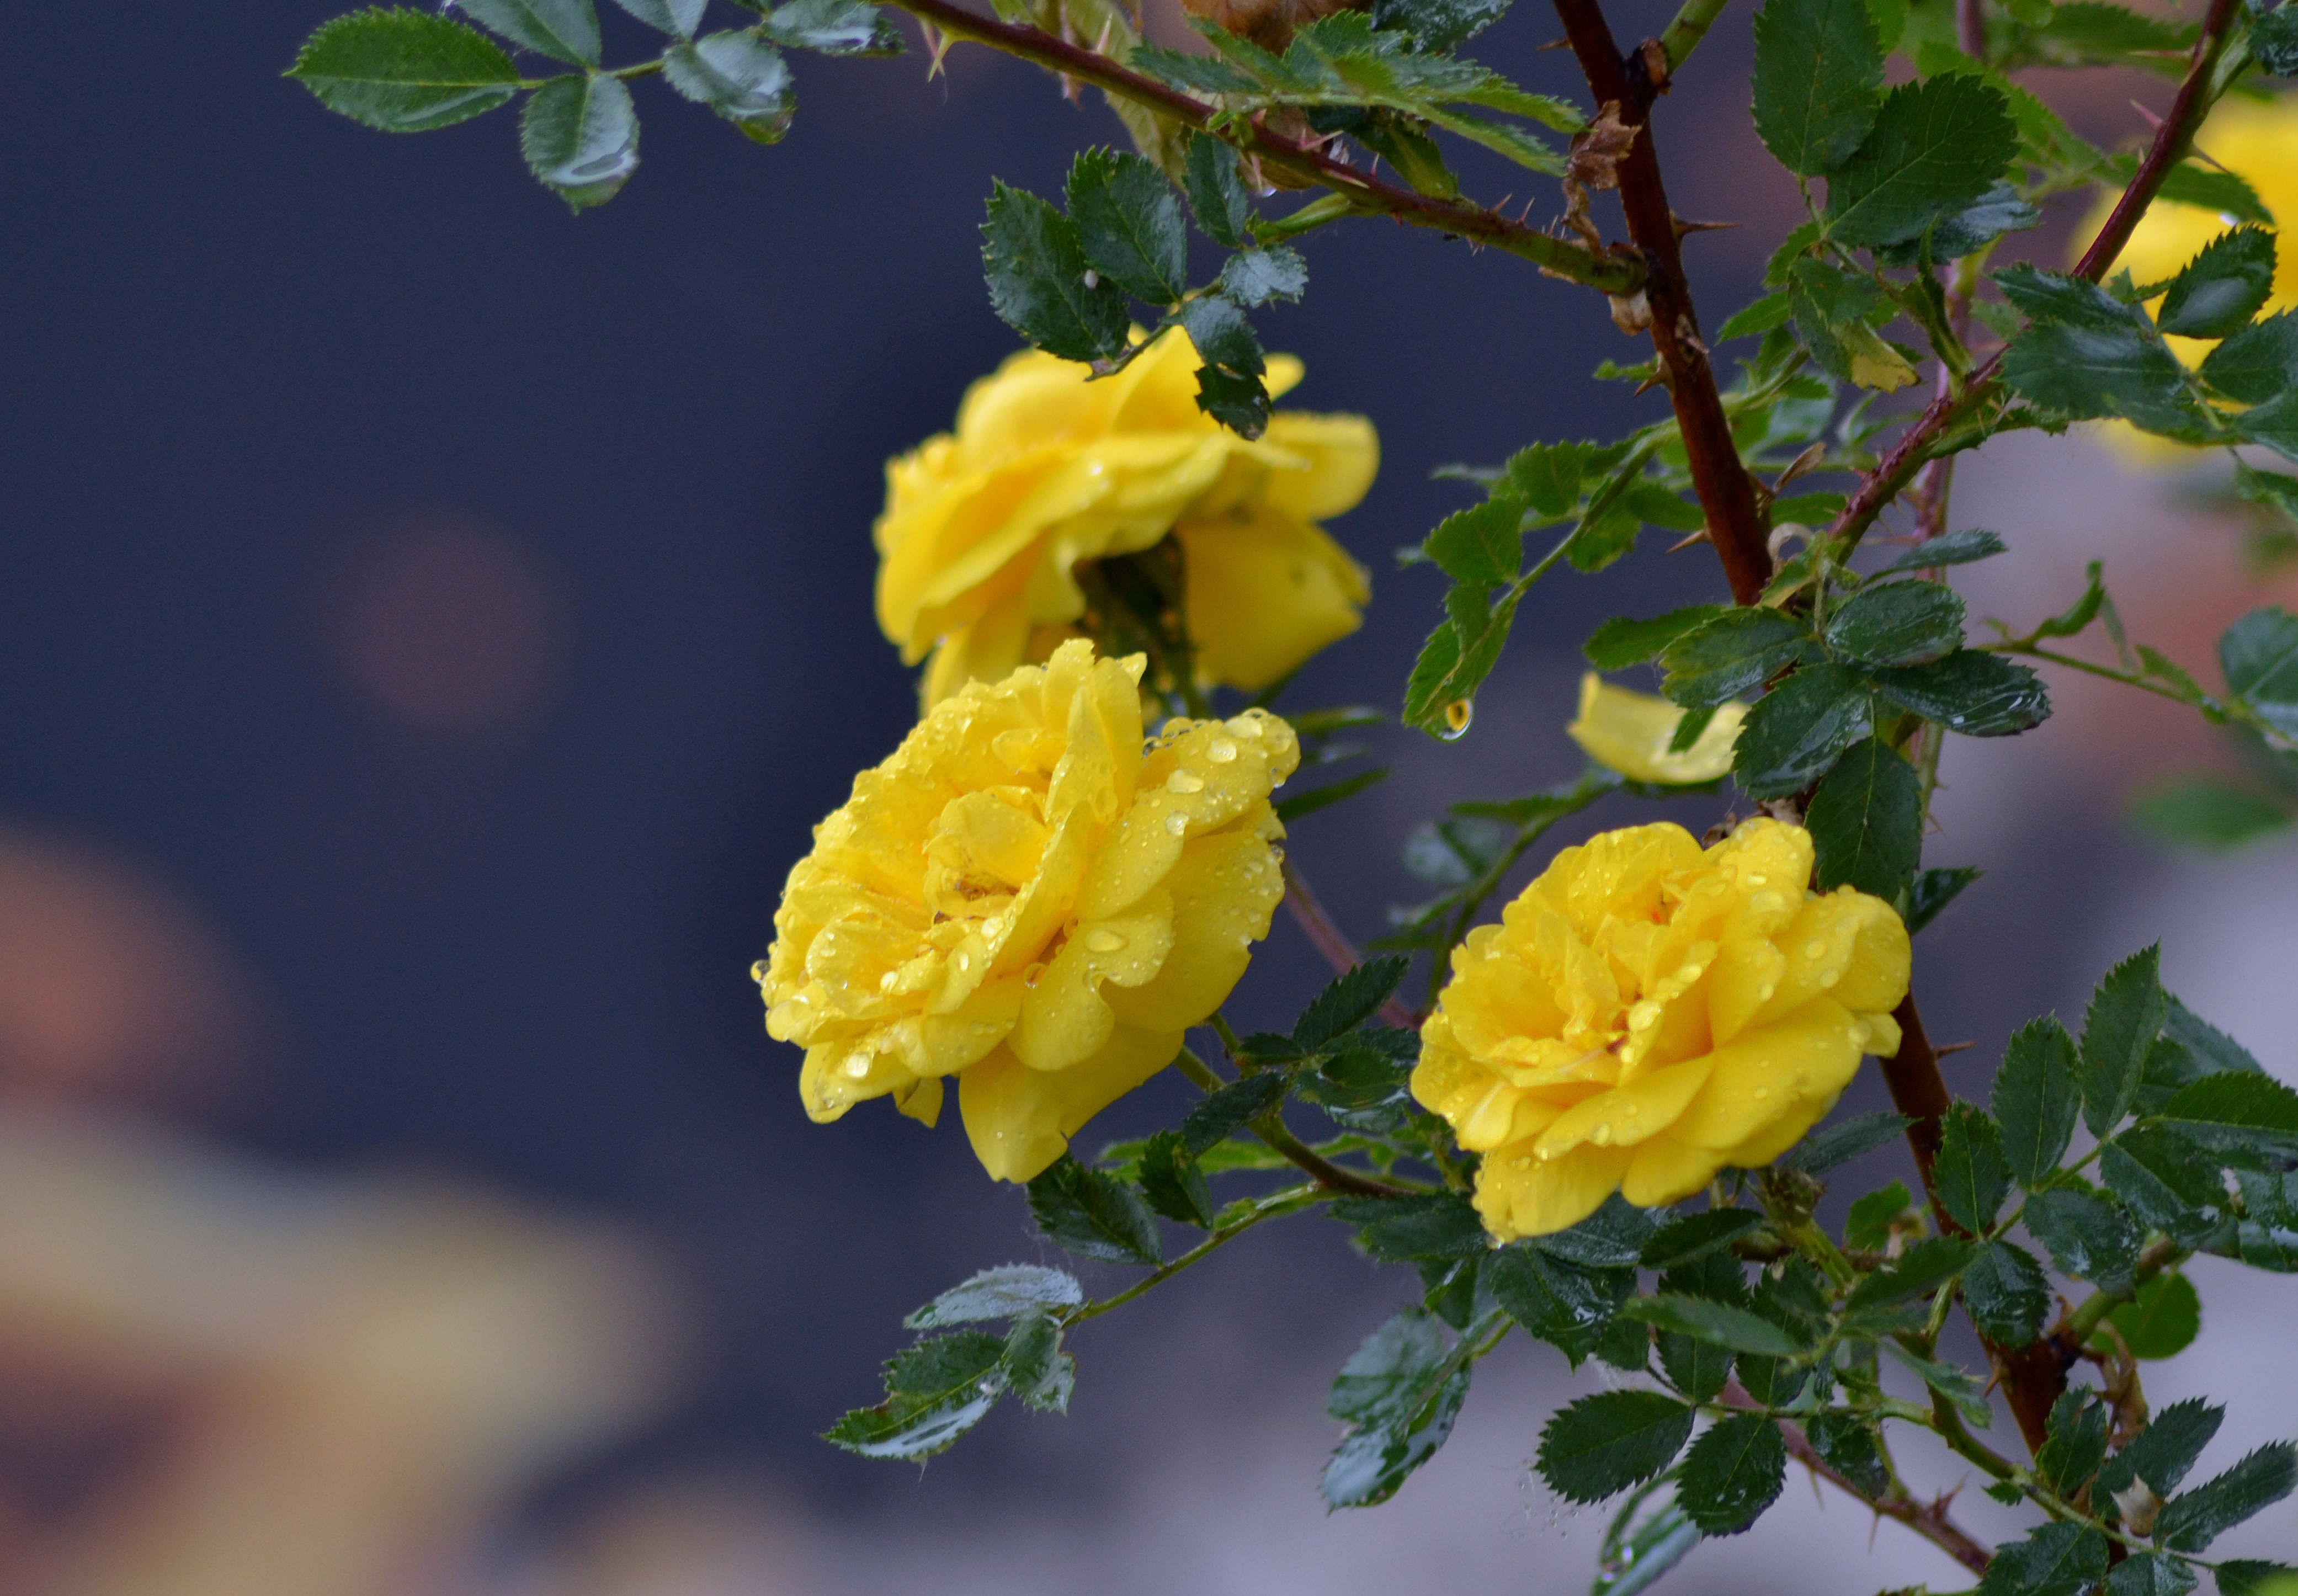 yellow roses, roses, flowers, drops, branch